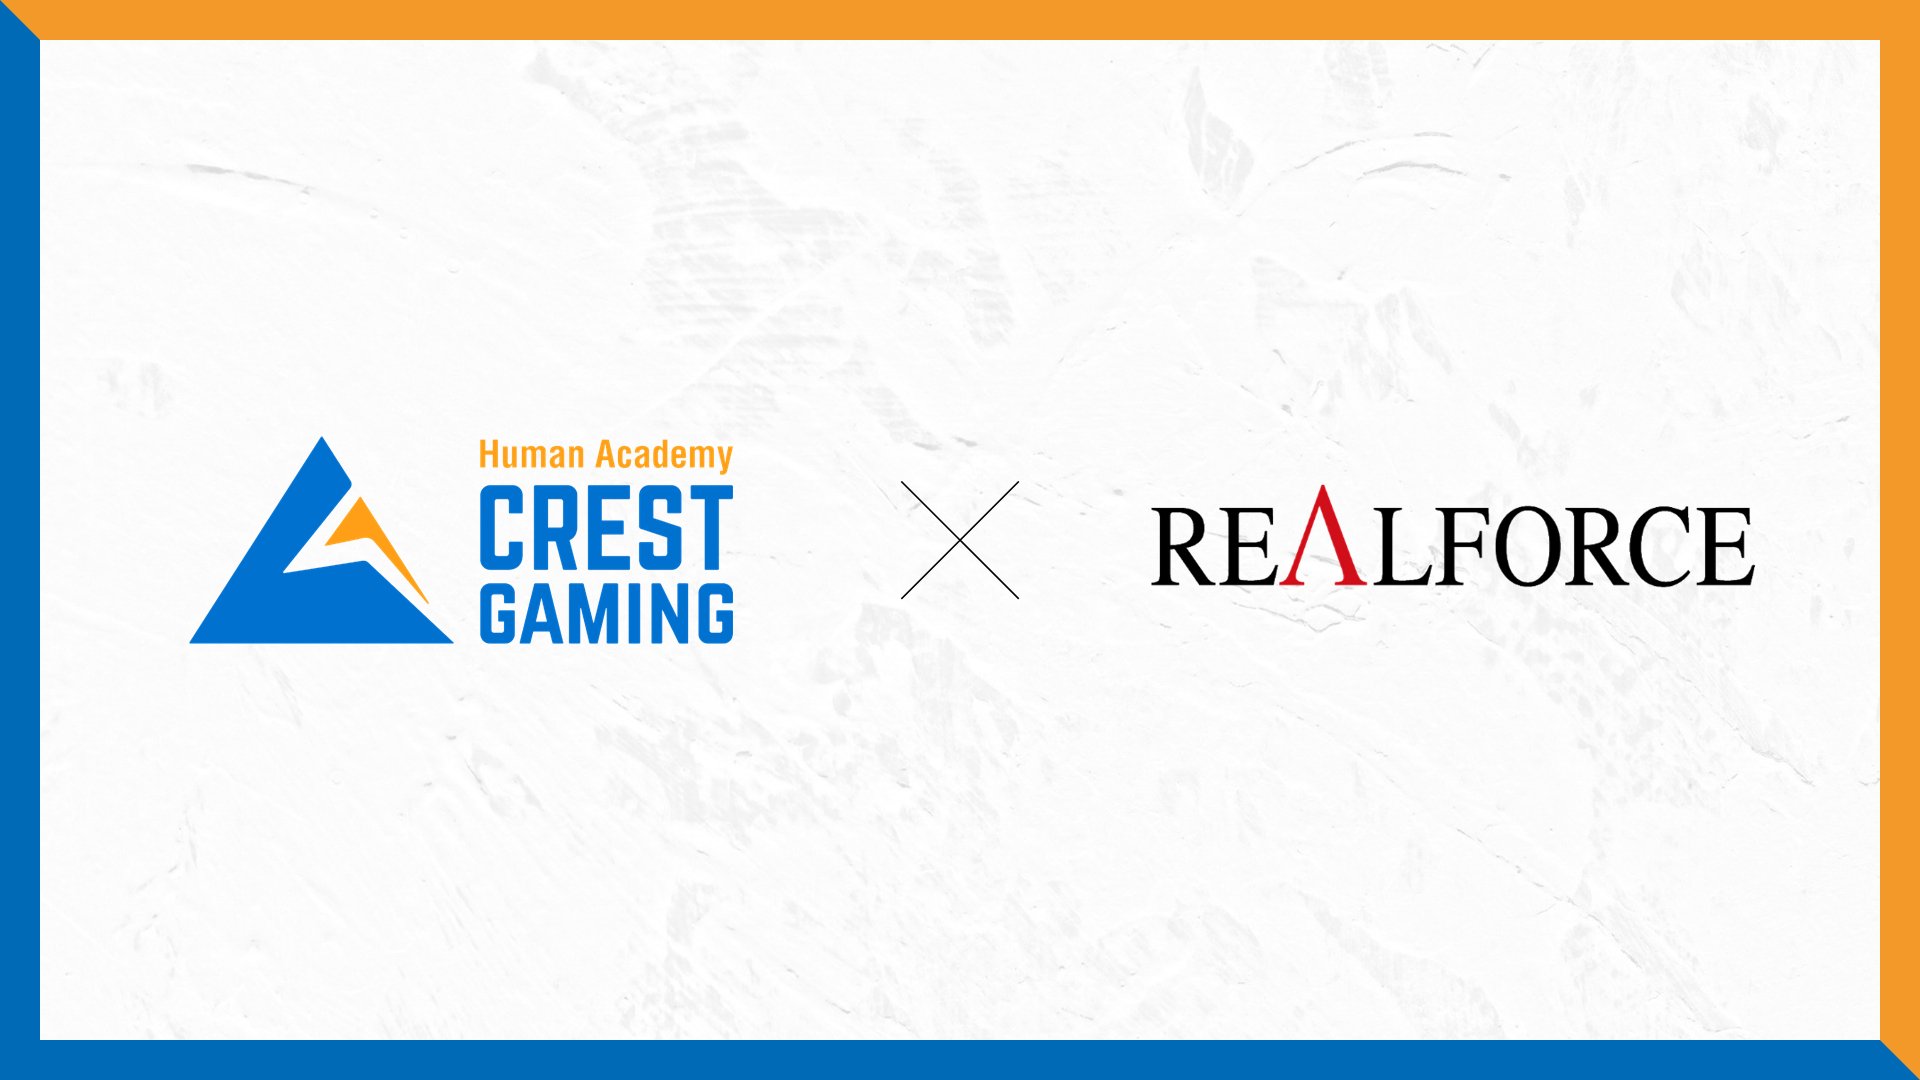 Human Academy CREST GAMING×REALFORCE